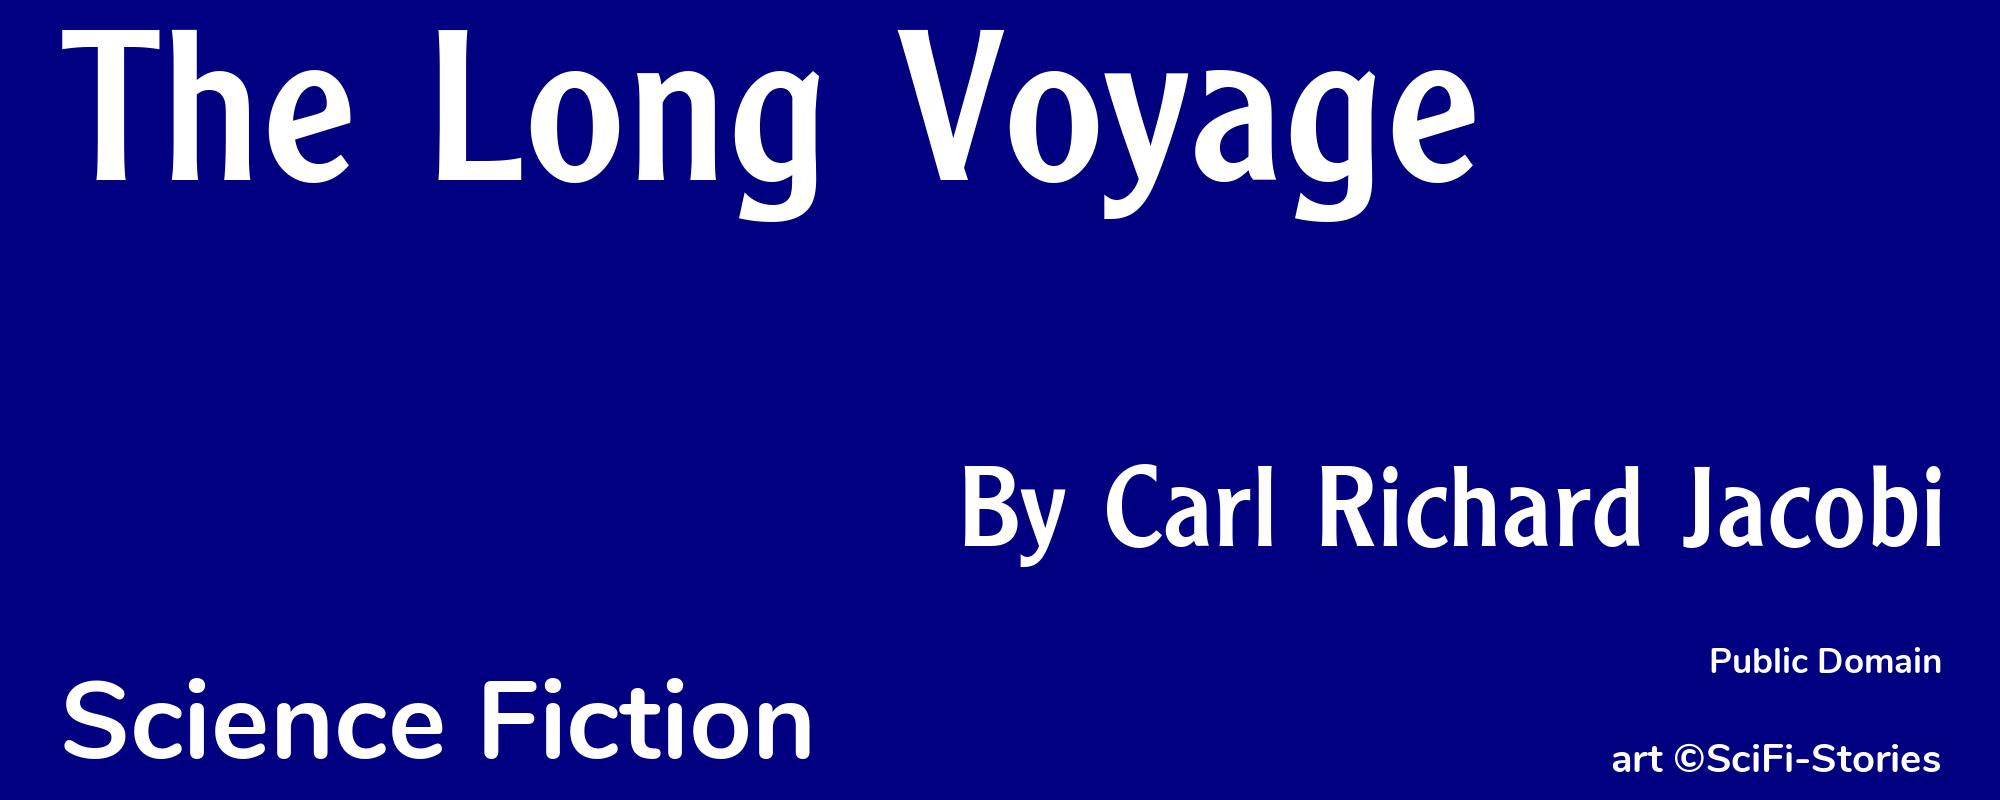 The Long Voyage - Cover